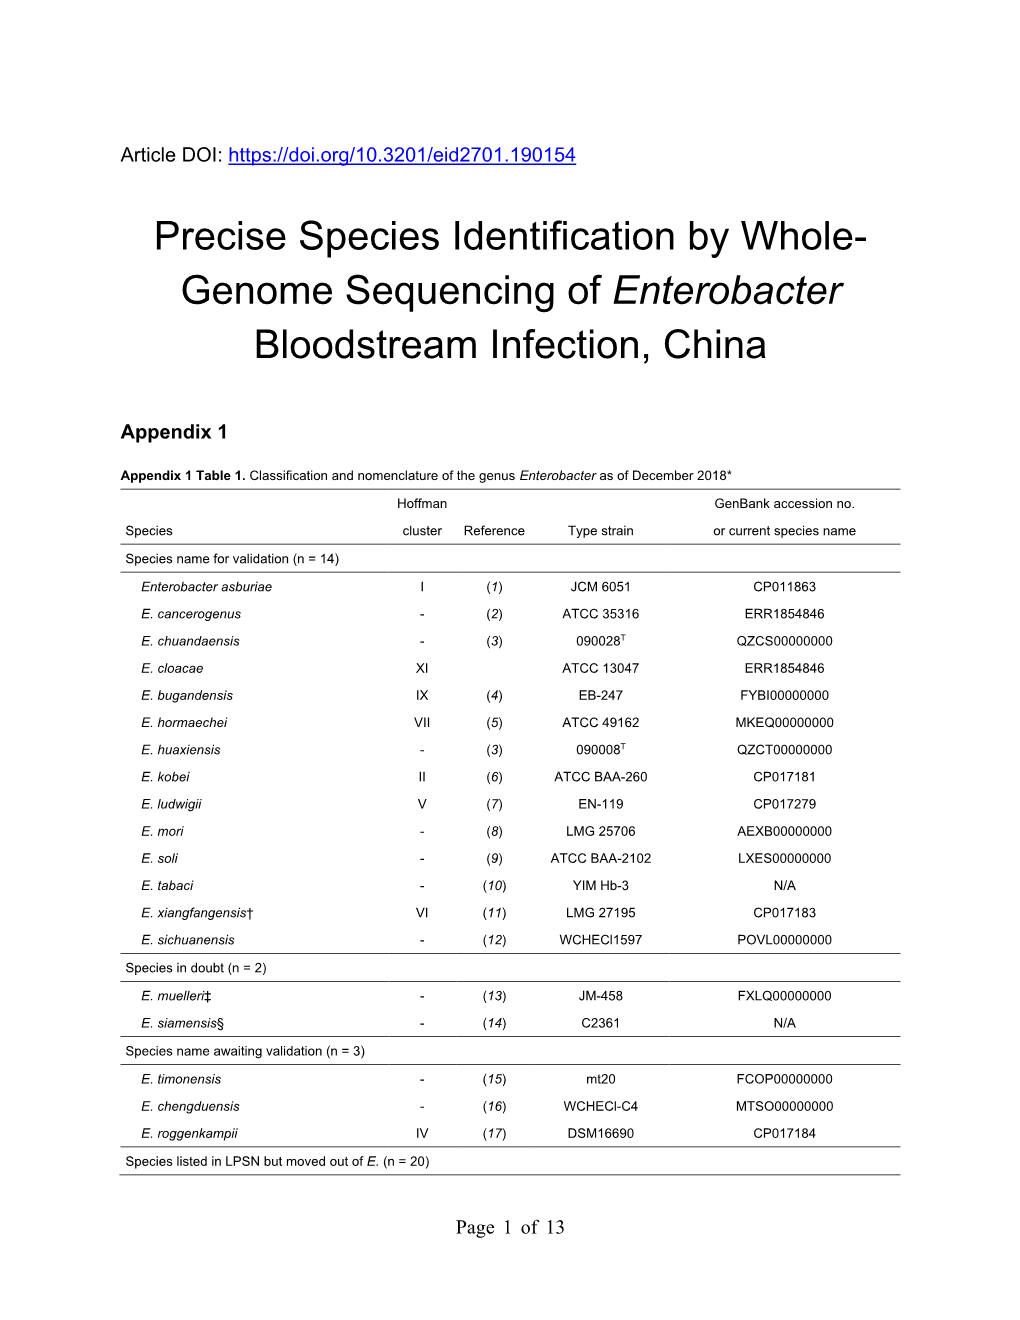 Genome Sequencing of Enterobacter Bloodstream Infection, China